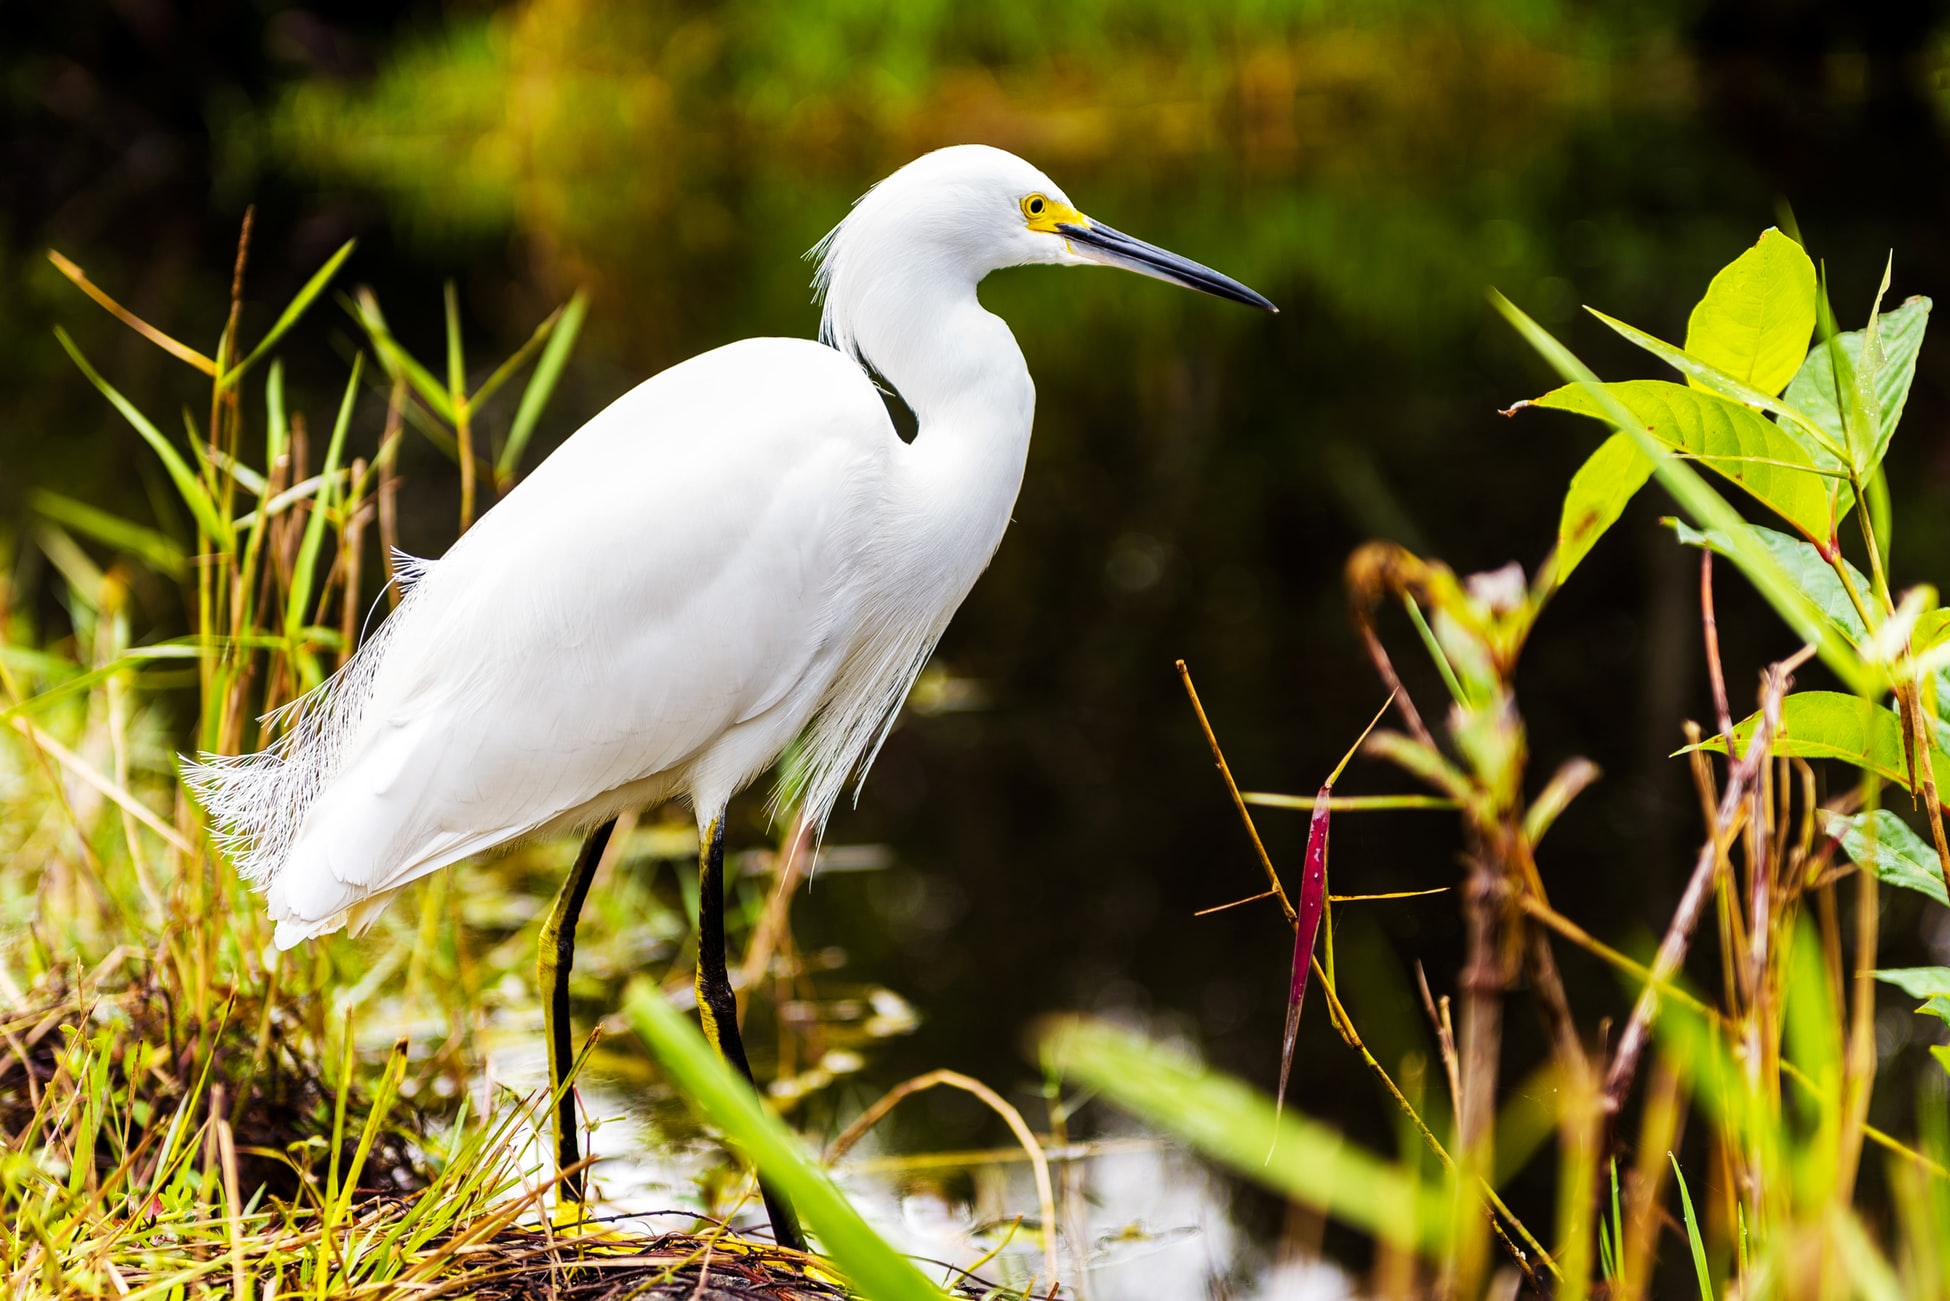 One of his first executive orders in 2019 called for $2.5 billion over the next four years for Everglades restoration and protection of Florida's water resources.